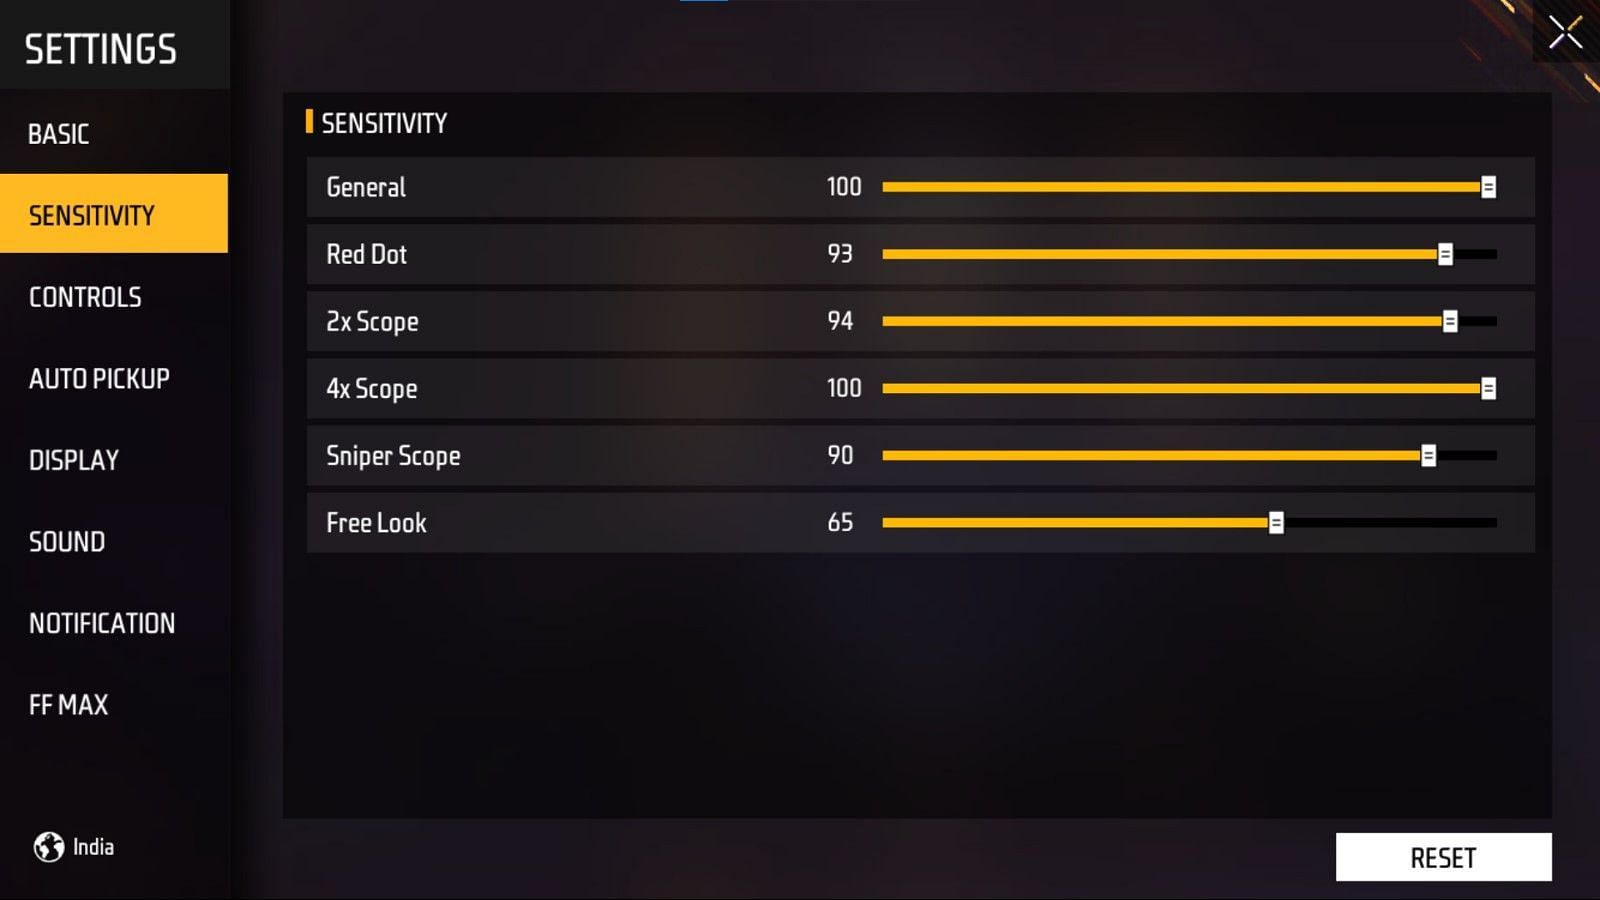 Users must keep all sensitivity sliders to high in low-performing devices (Image via Garena)